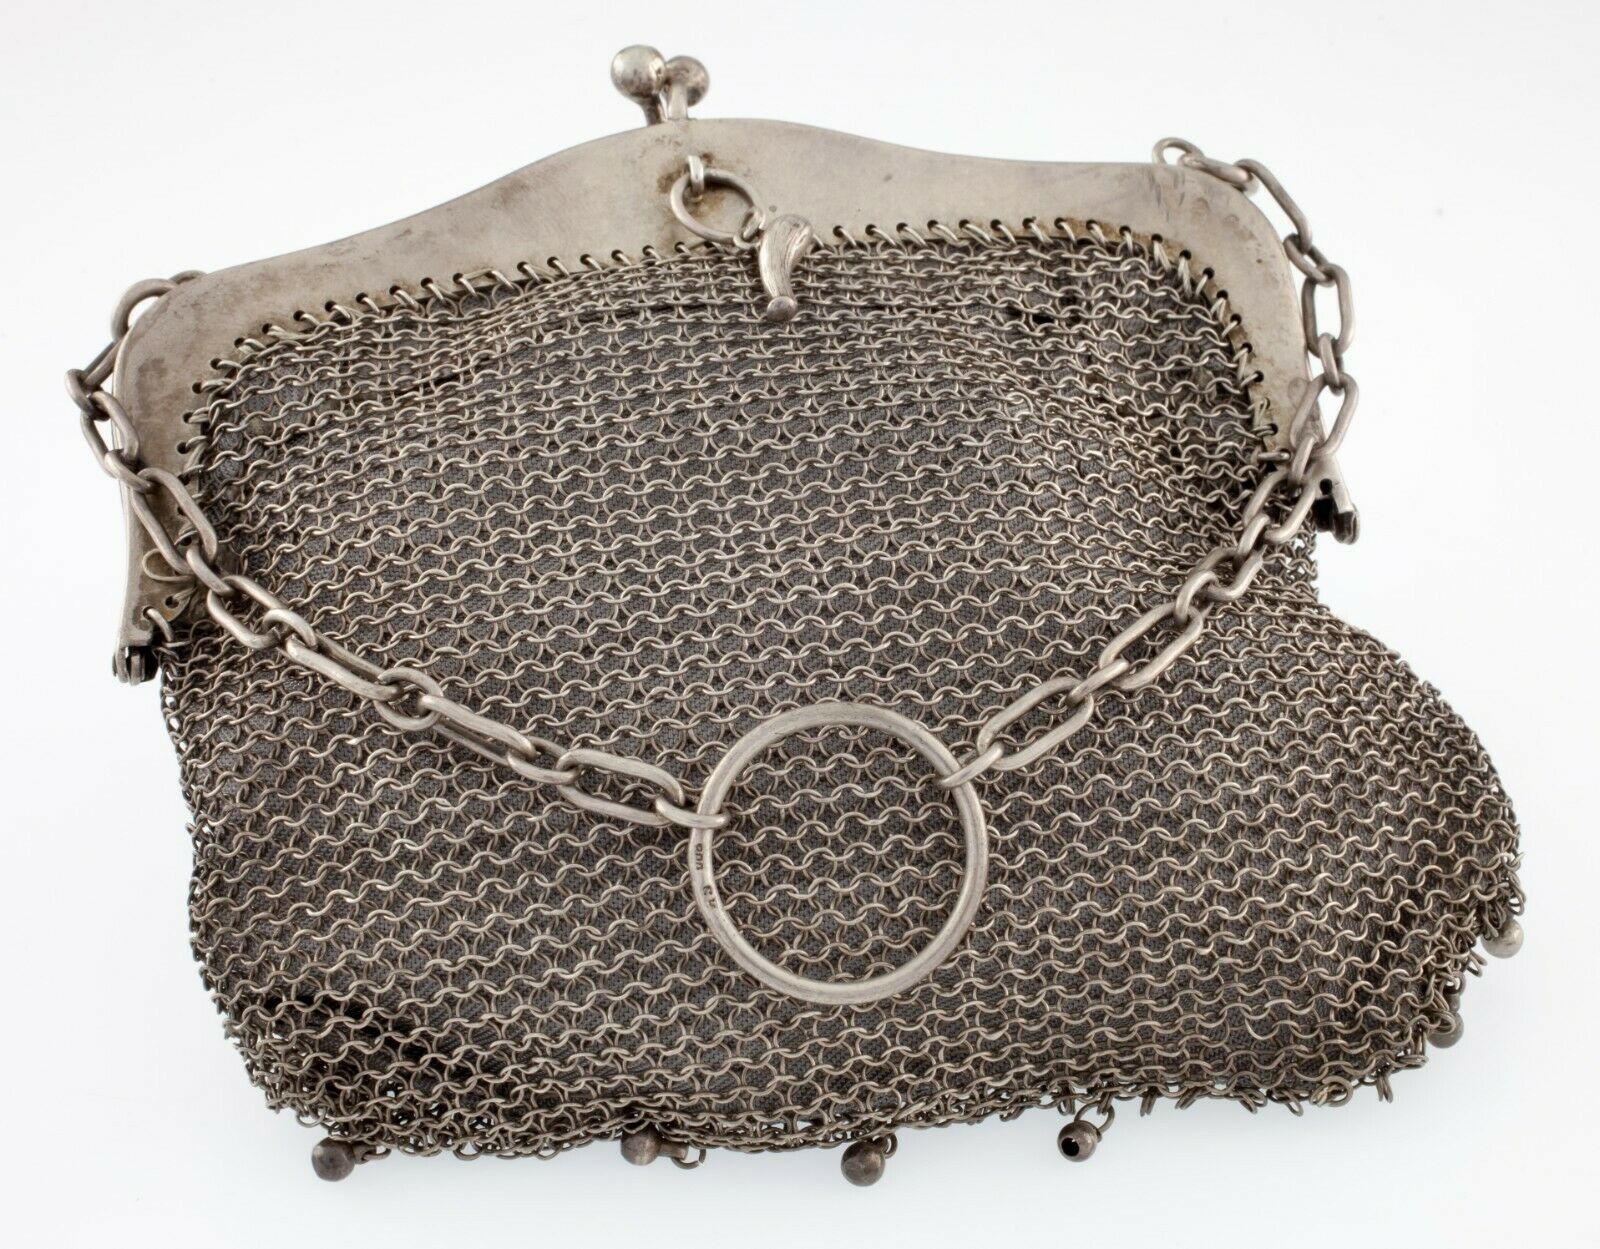 Buy Victorian Antique Silver Mesh Coin Purse Handmade Vintage Edwardian Era  Chatelaine Purse Antique Accessories Online in India - Etsy